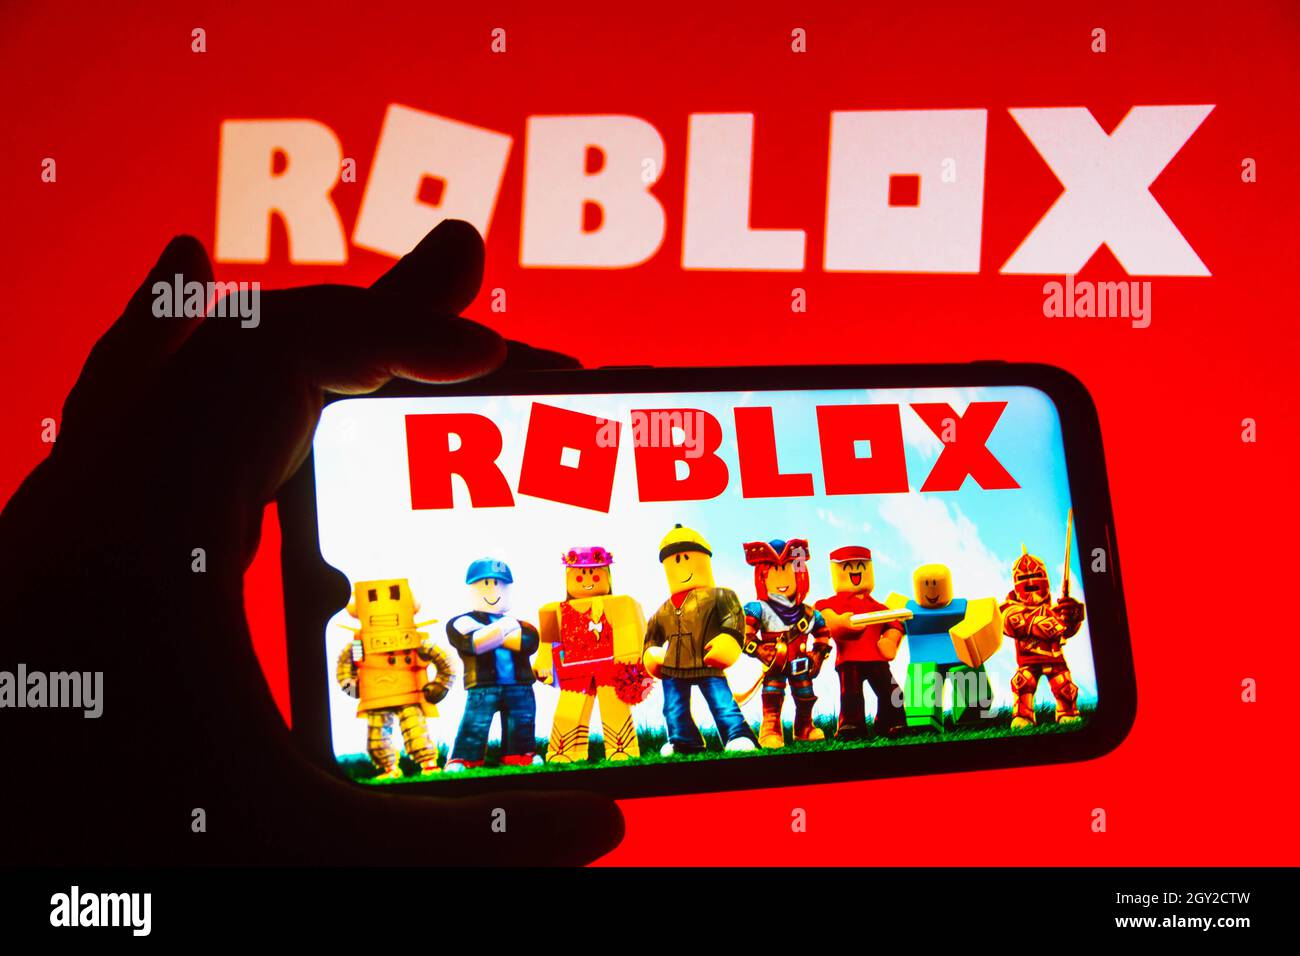 Roblox Logo Icon Spotlighted on Black Background Editorial Stock